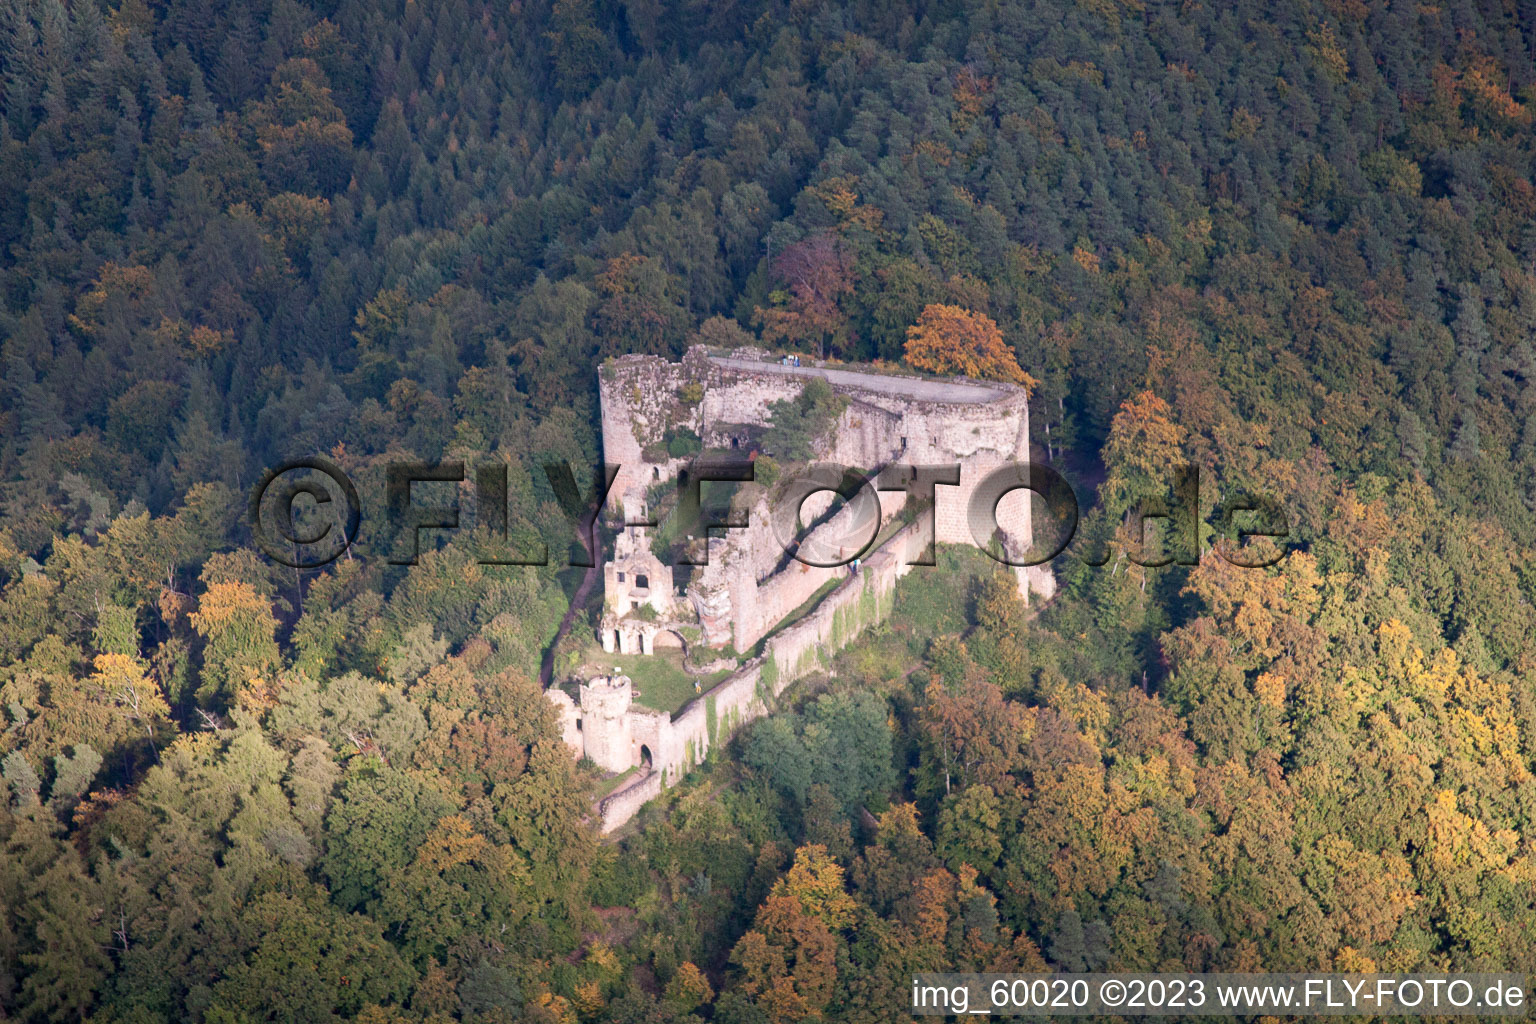 Oblique view of Neuscharfeneck ruins in Dernbach in the state Rhineland-Palatinate, Germany